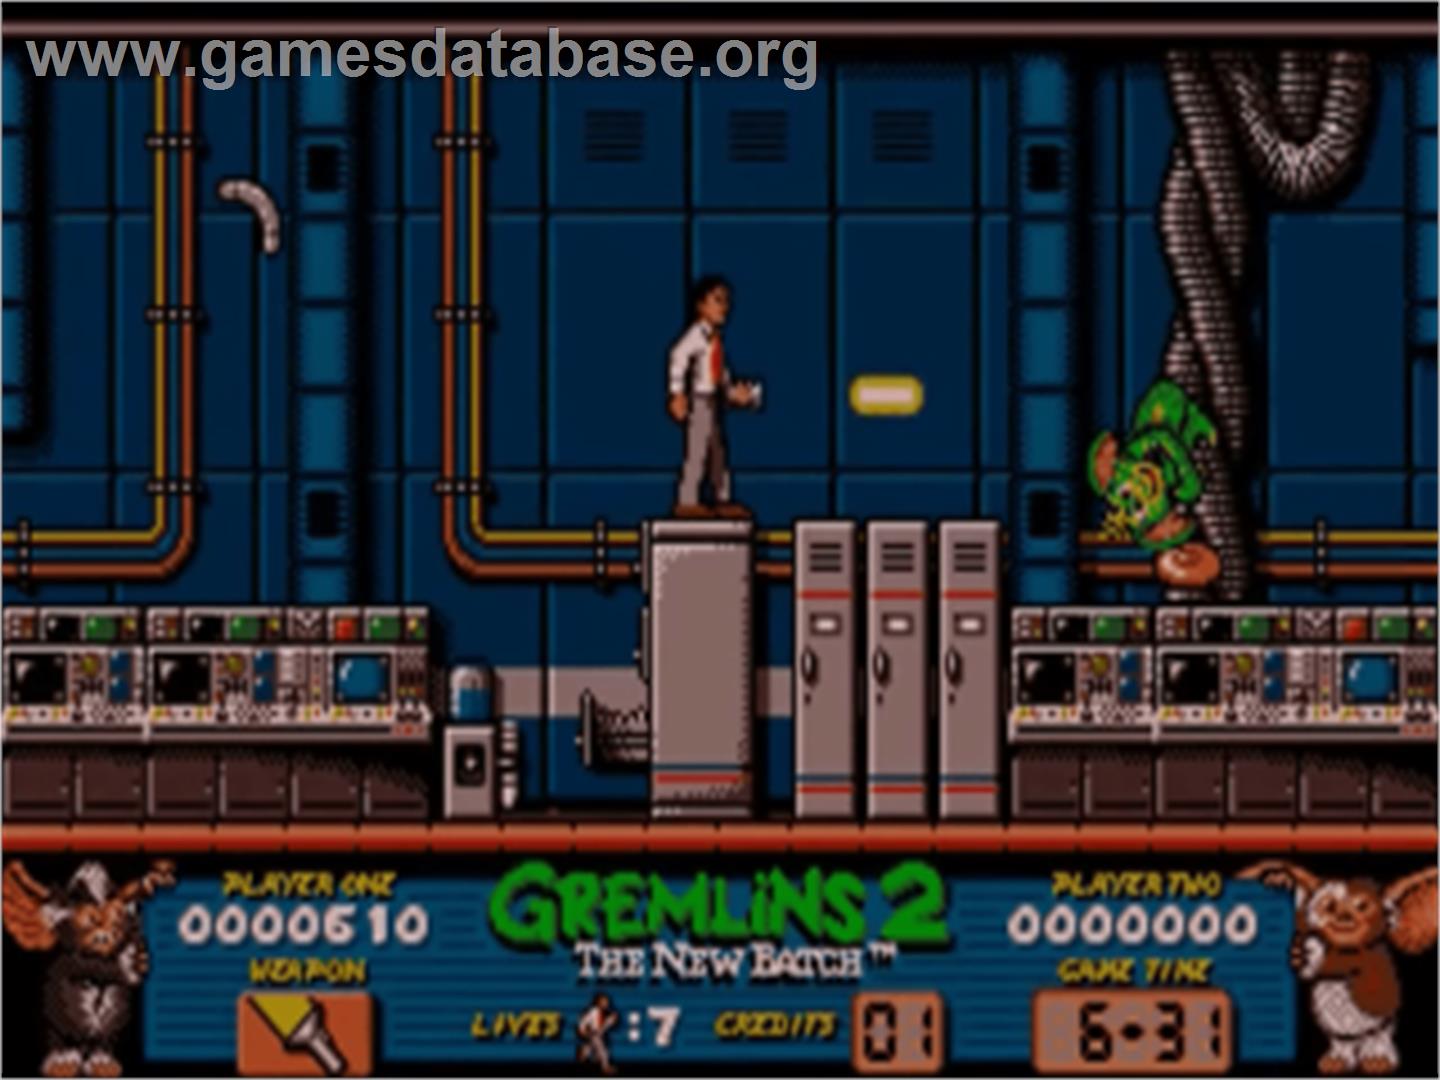 Gremlins 2: The New Batch - Commodore Amiga - Artwork - In Game